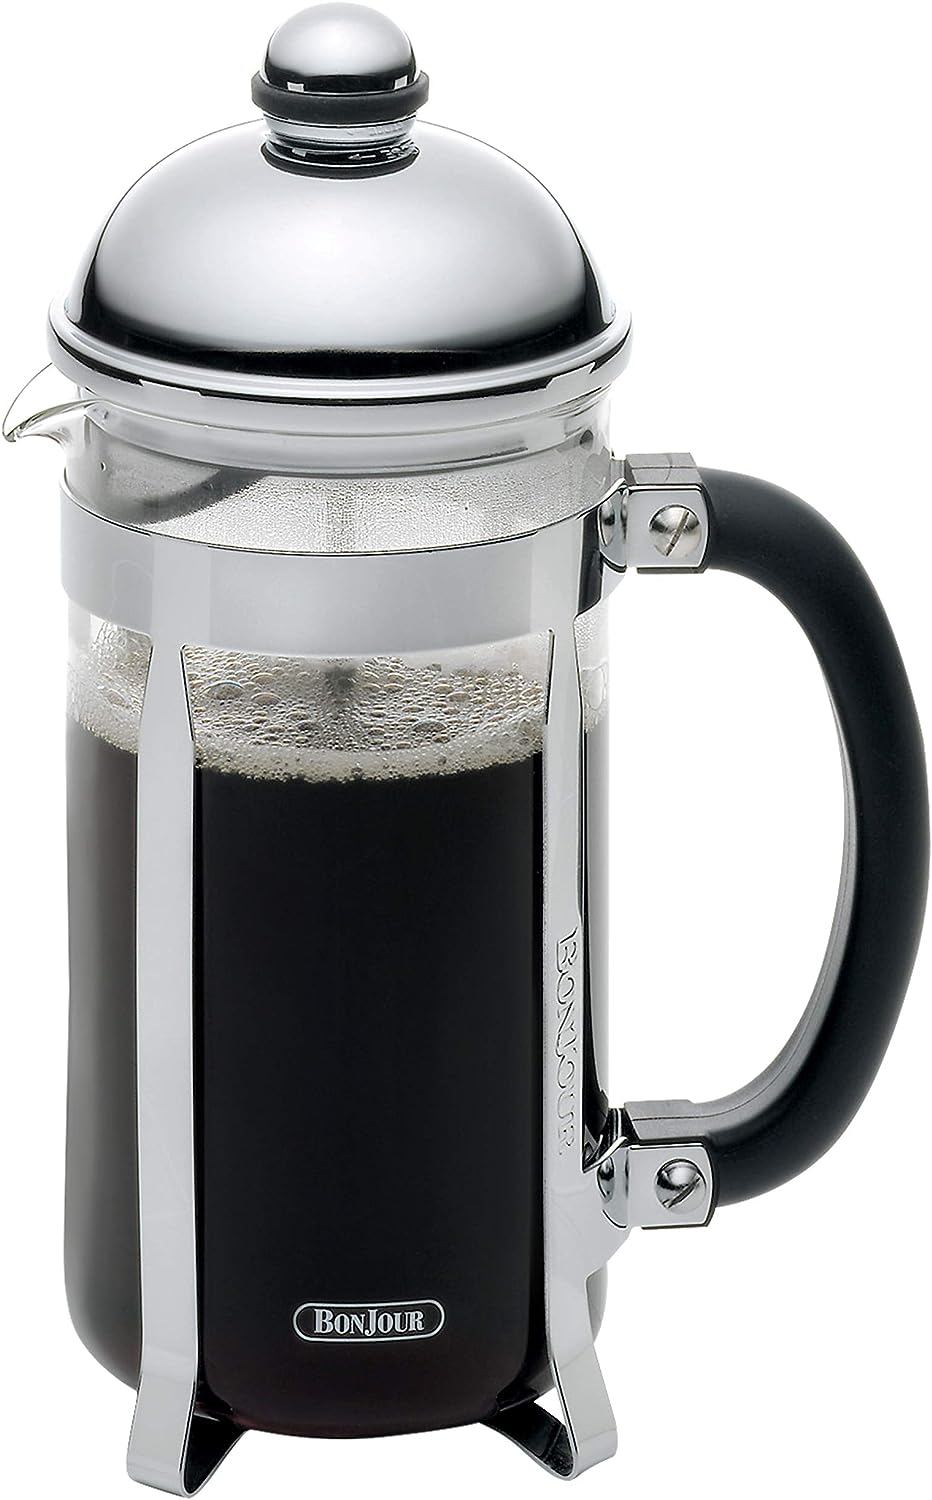 Bonjour Maximus French Press Coffee Maker, 8 Cup, Silver